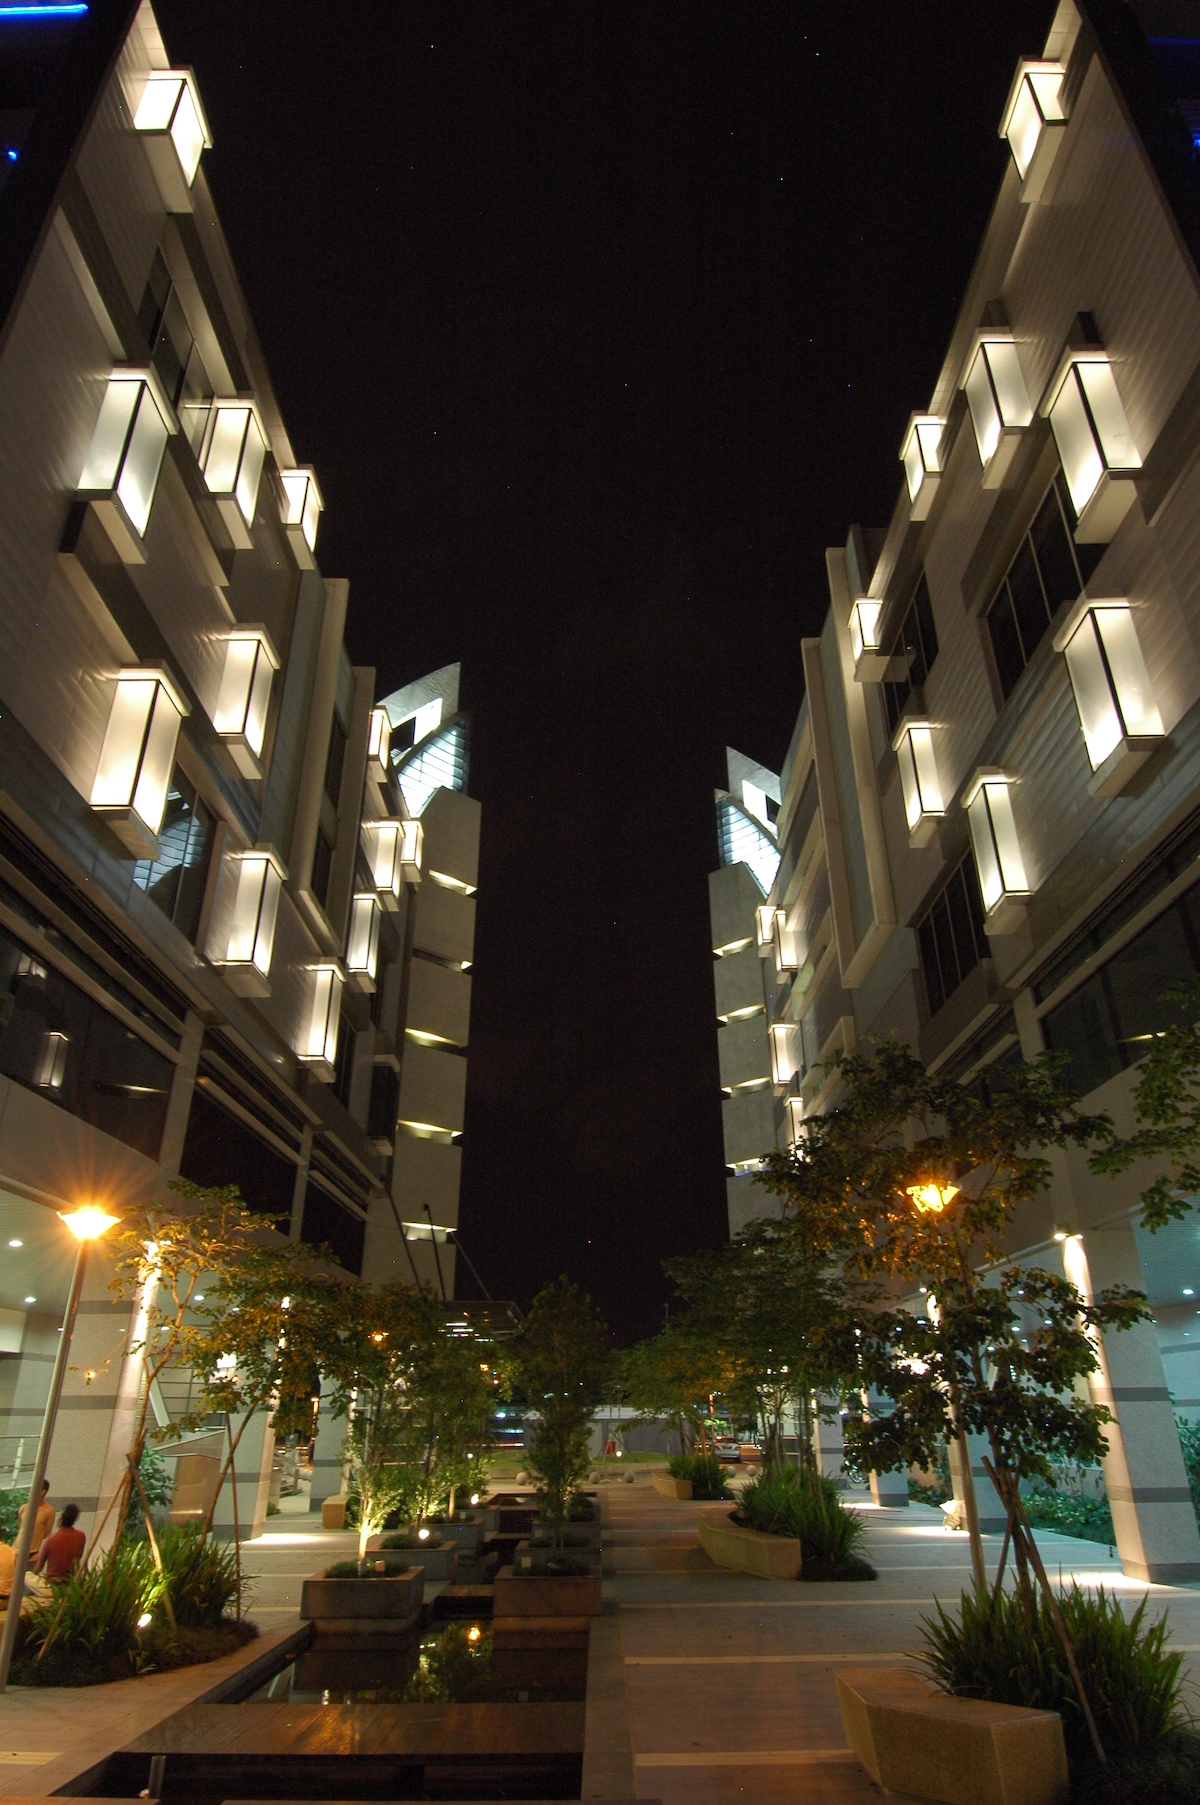 Commercial enclave by night